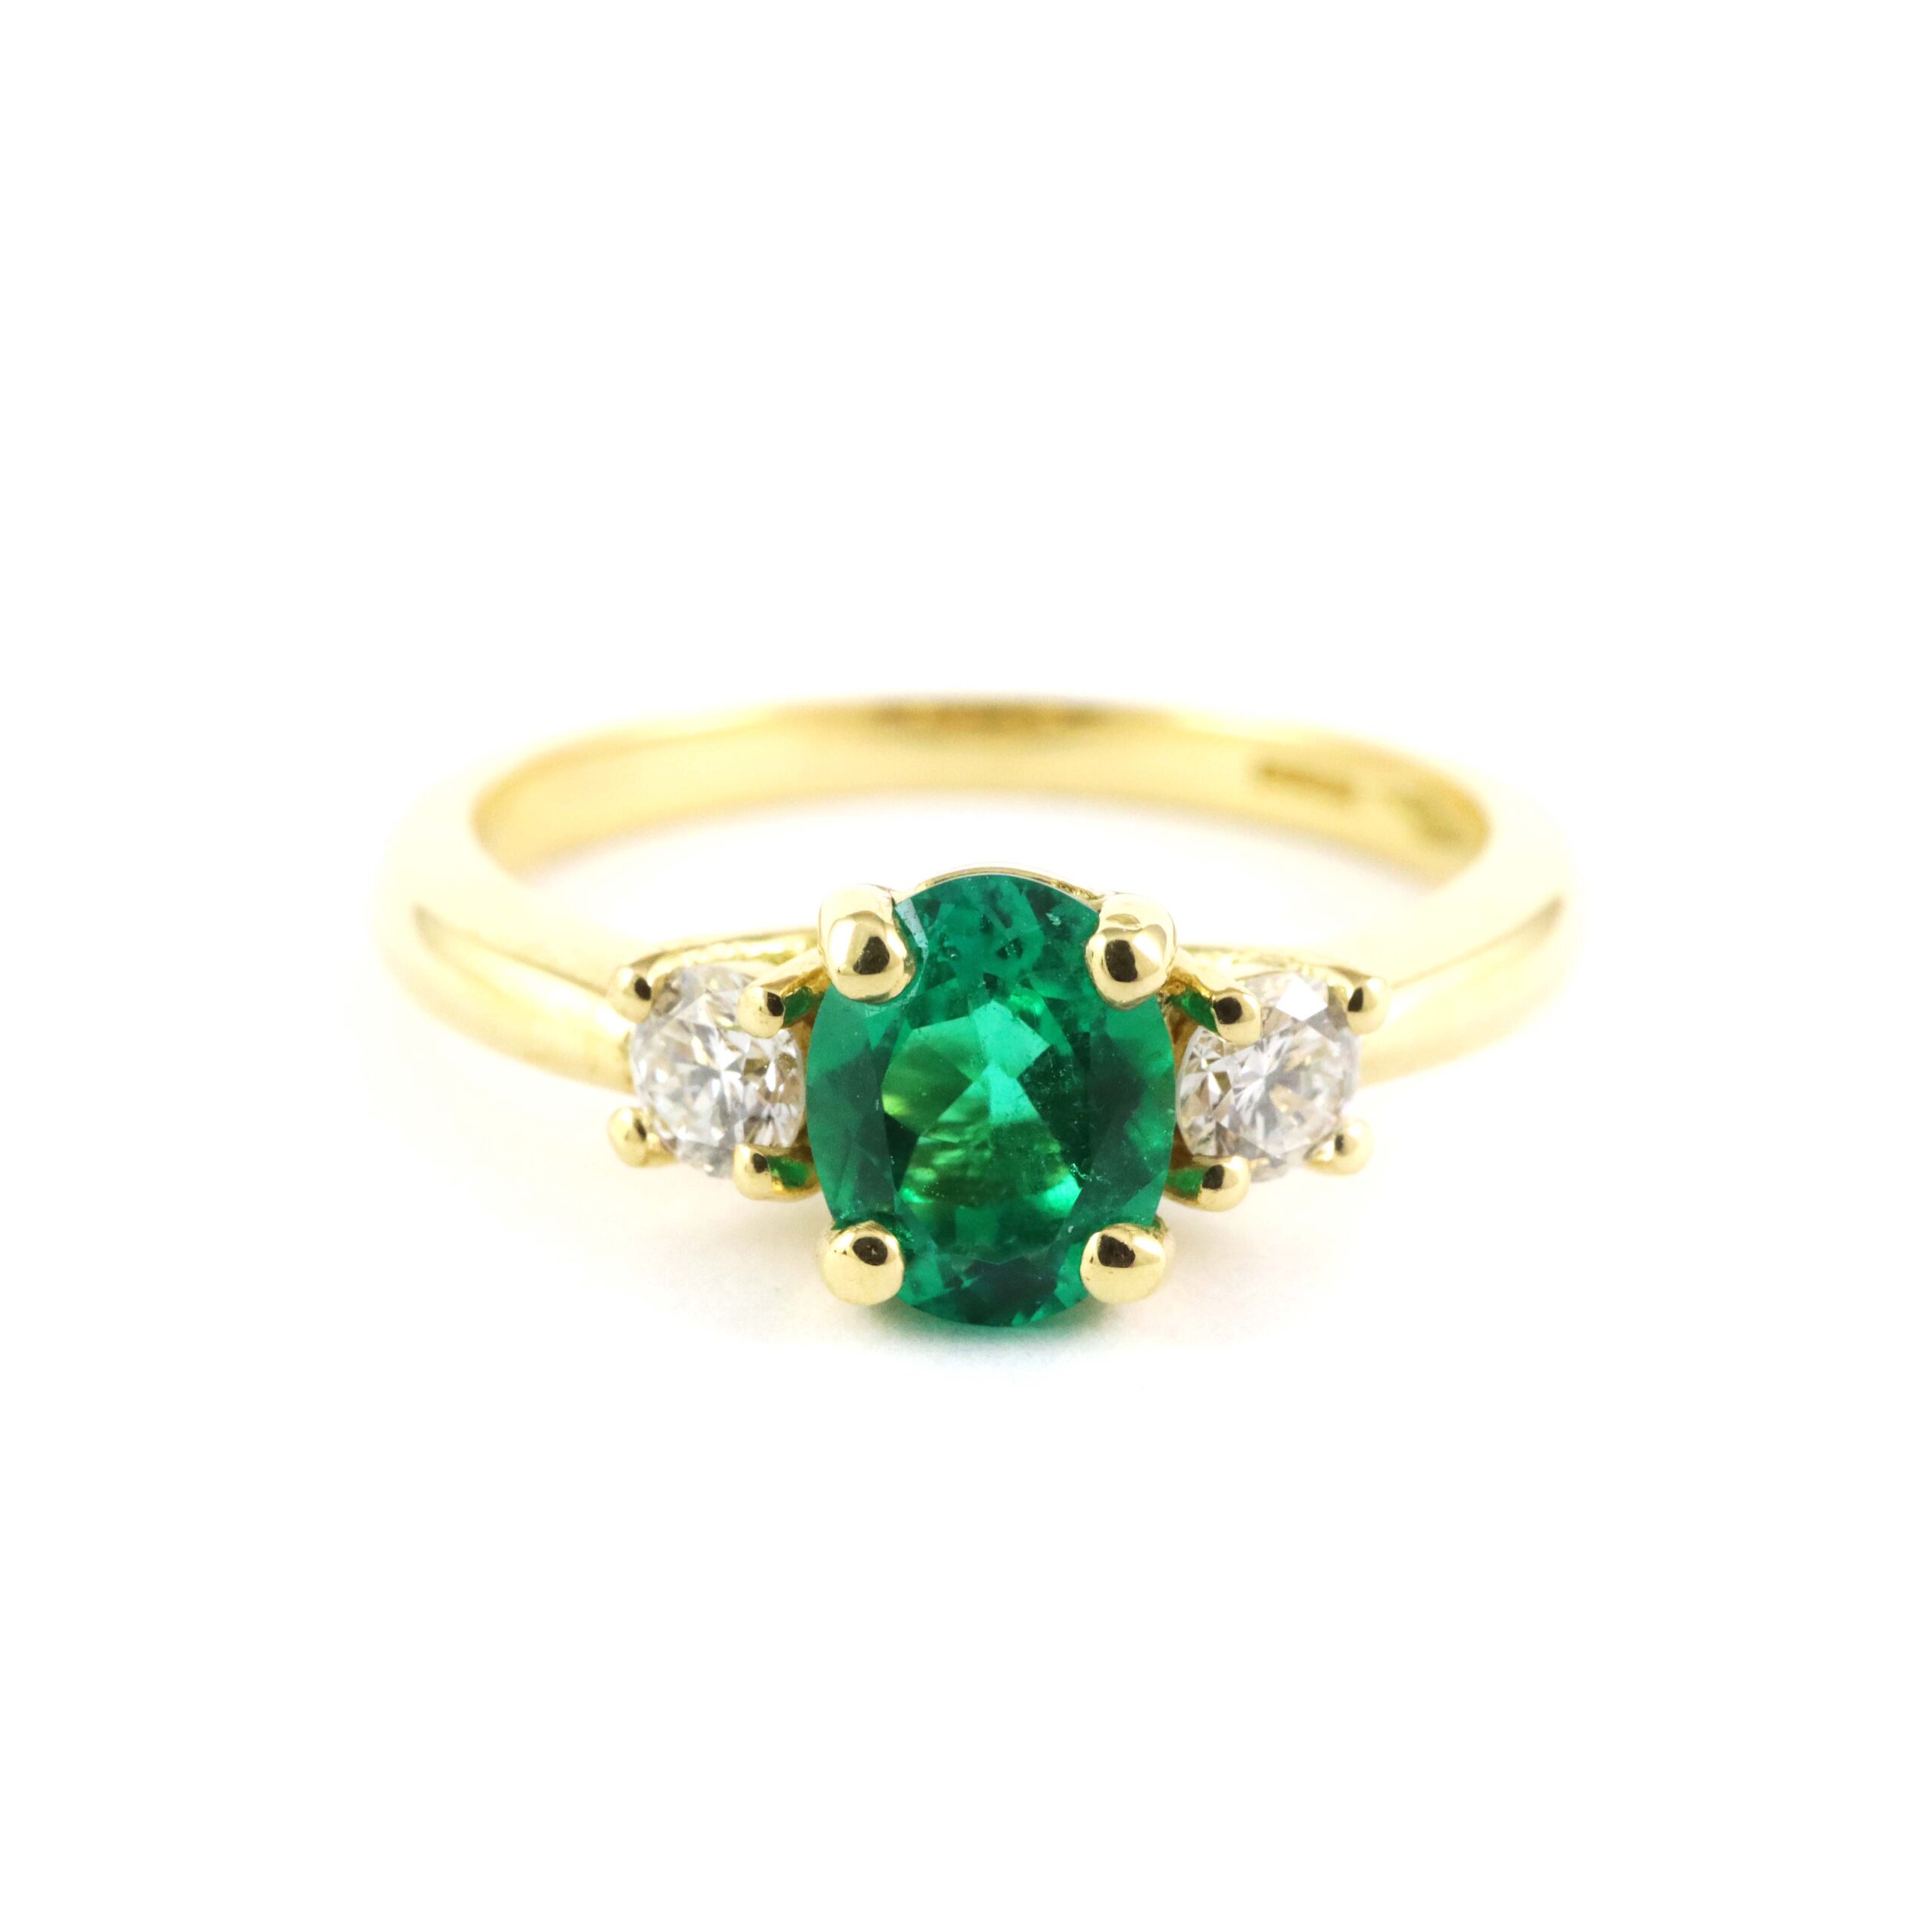 Emerald and diamond trilogy ring in gold